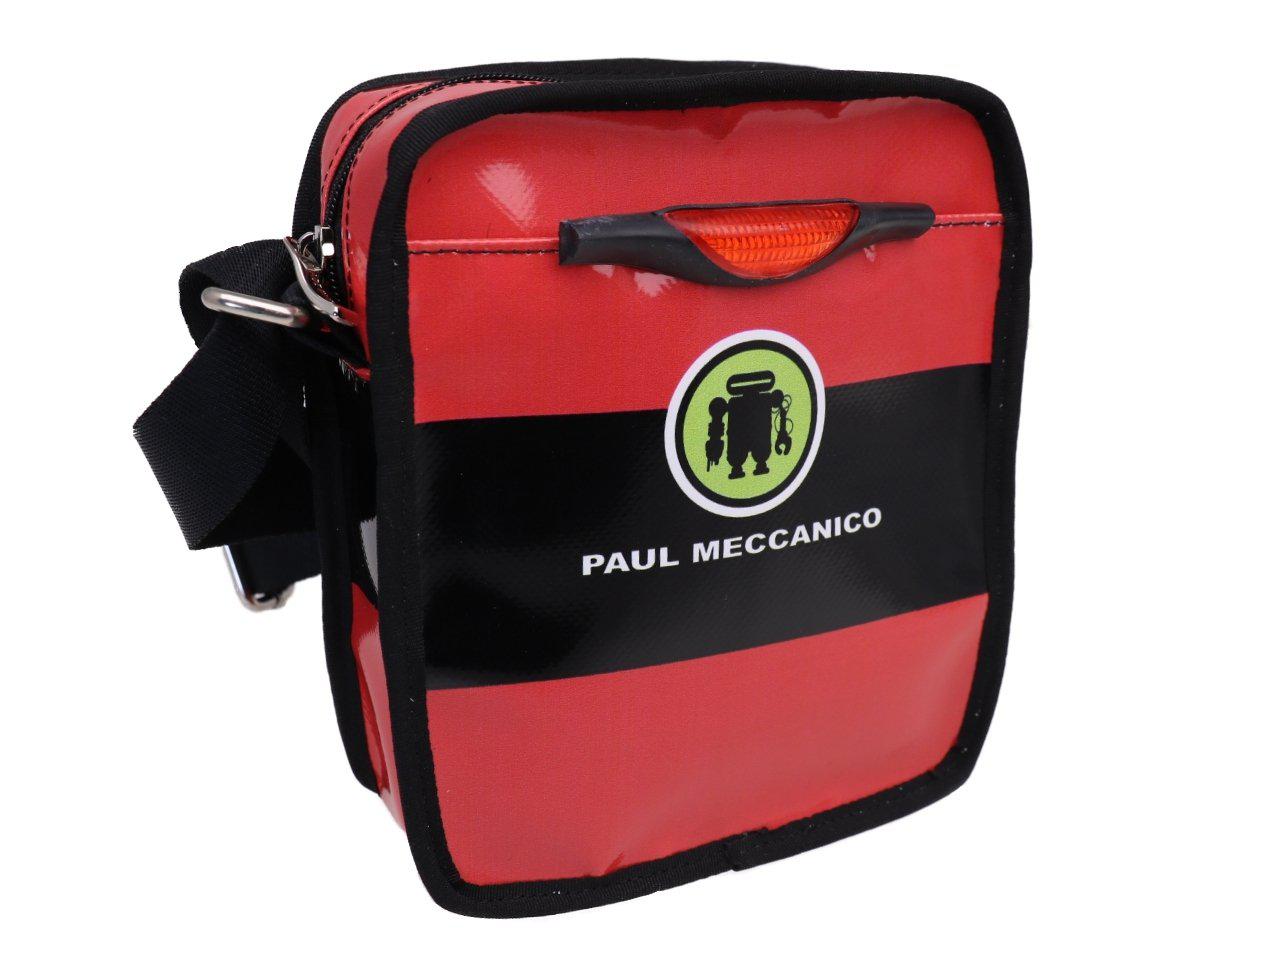 CROSSBODY BAG RED, BLACK AND GREEN. MODEL STRATOS MADE OF LORRY TARPAULIN. - Limited Edition Paul Meccanico